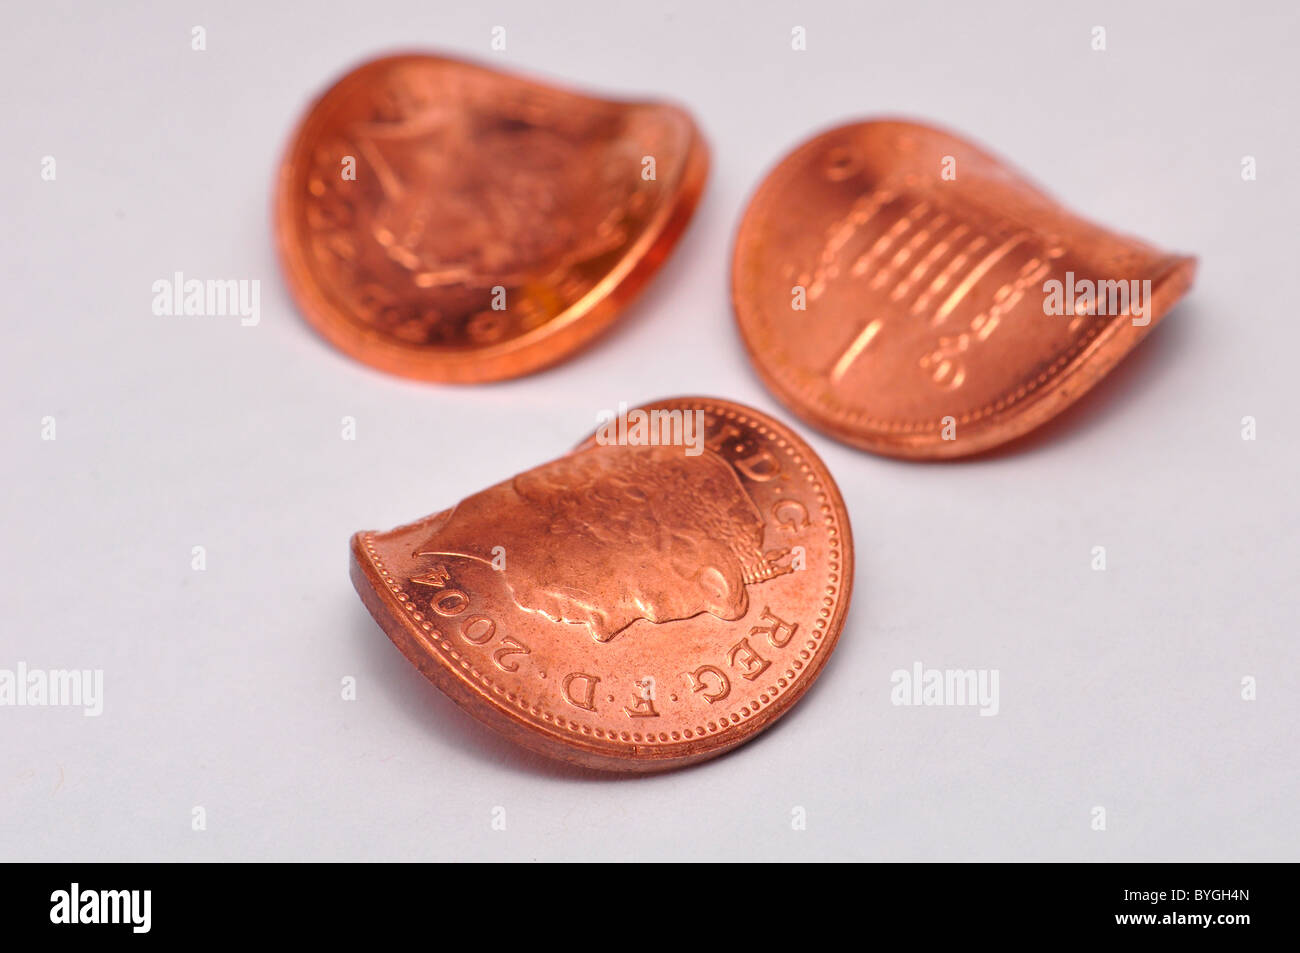 Three Bent Coppers, one penny coins Stock Photo